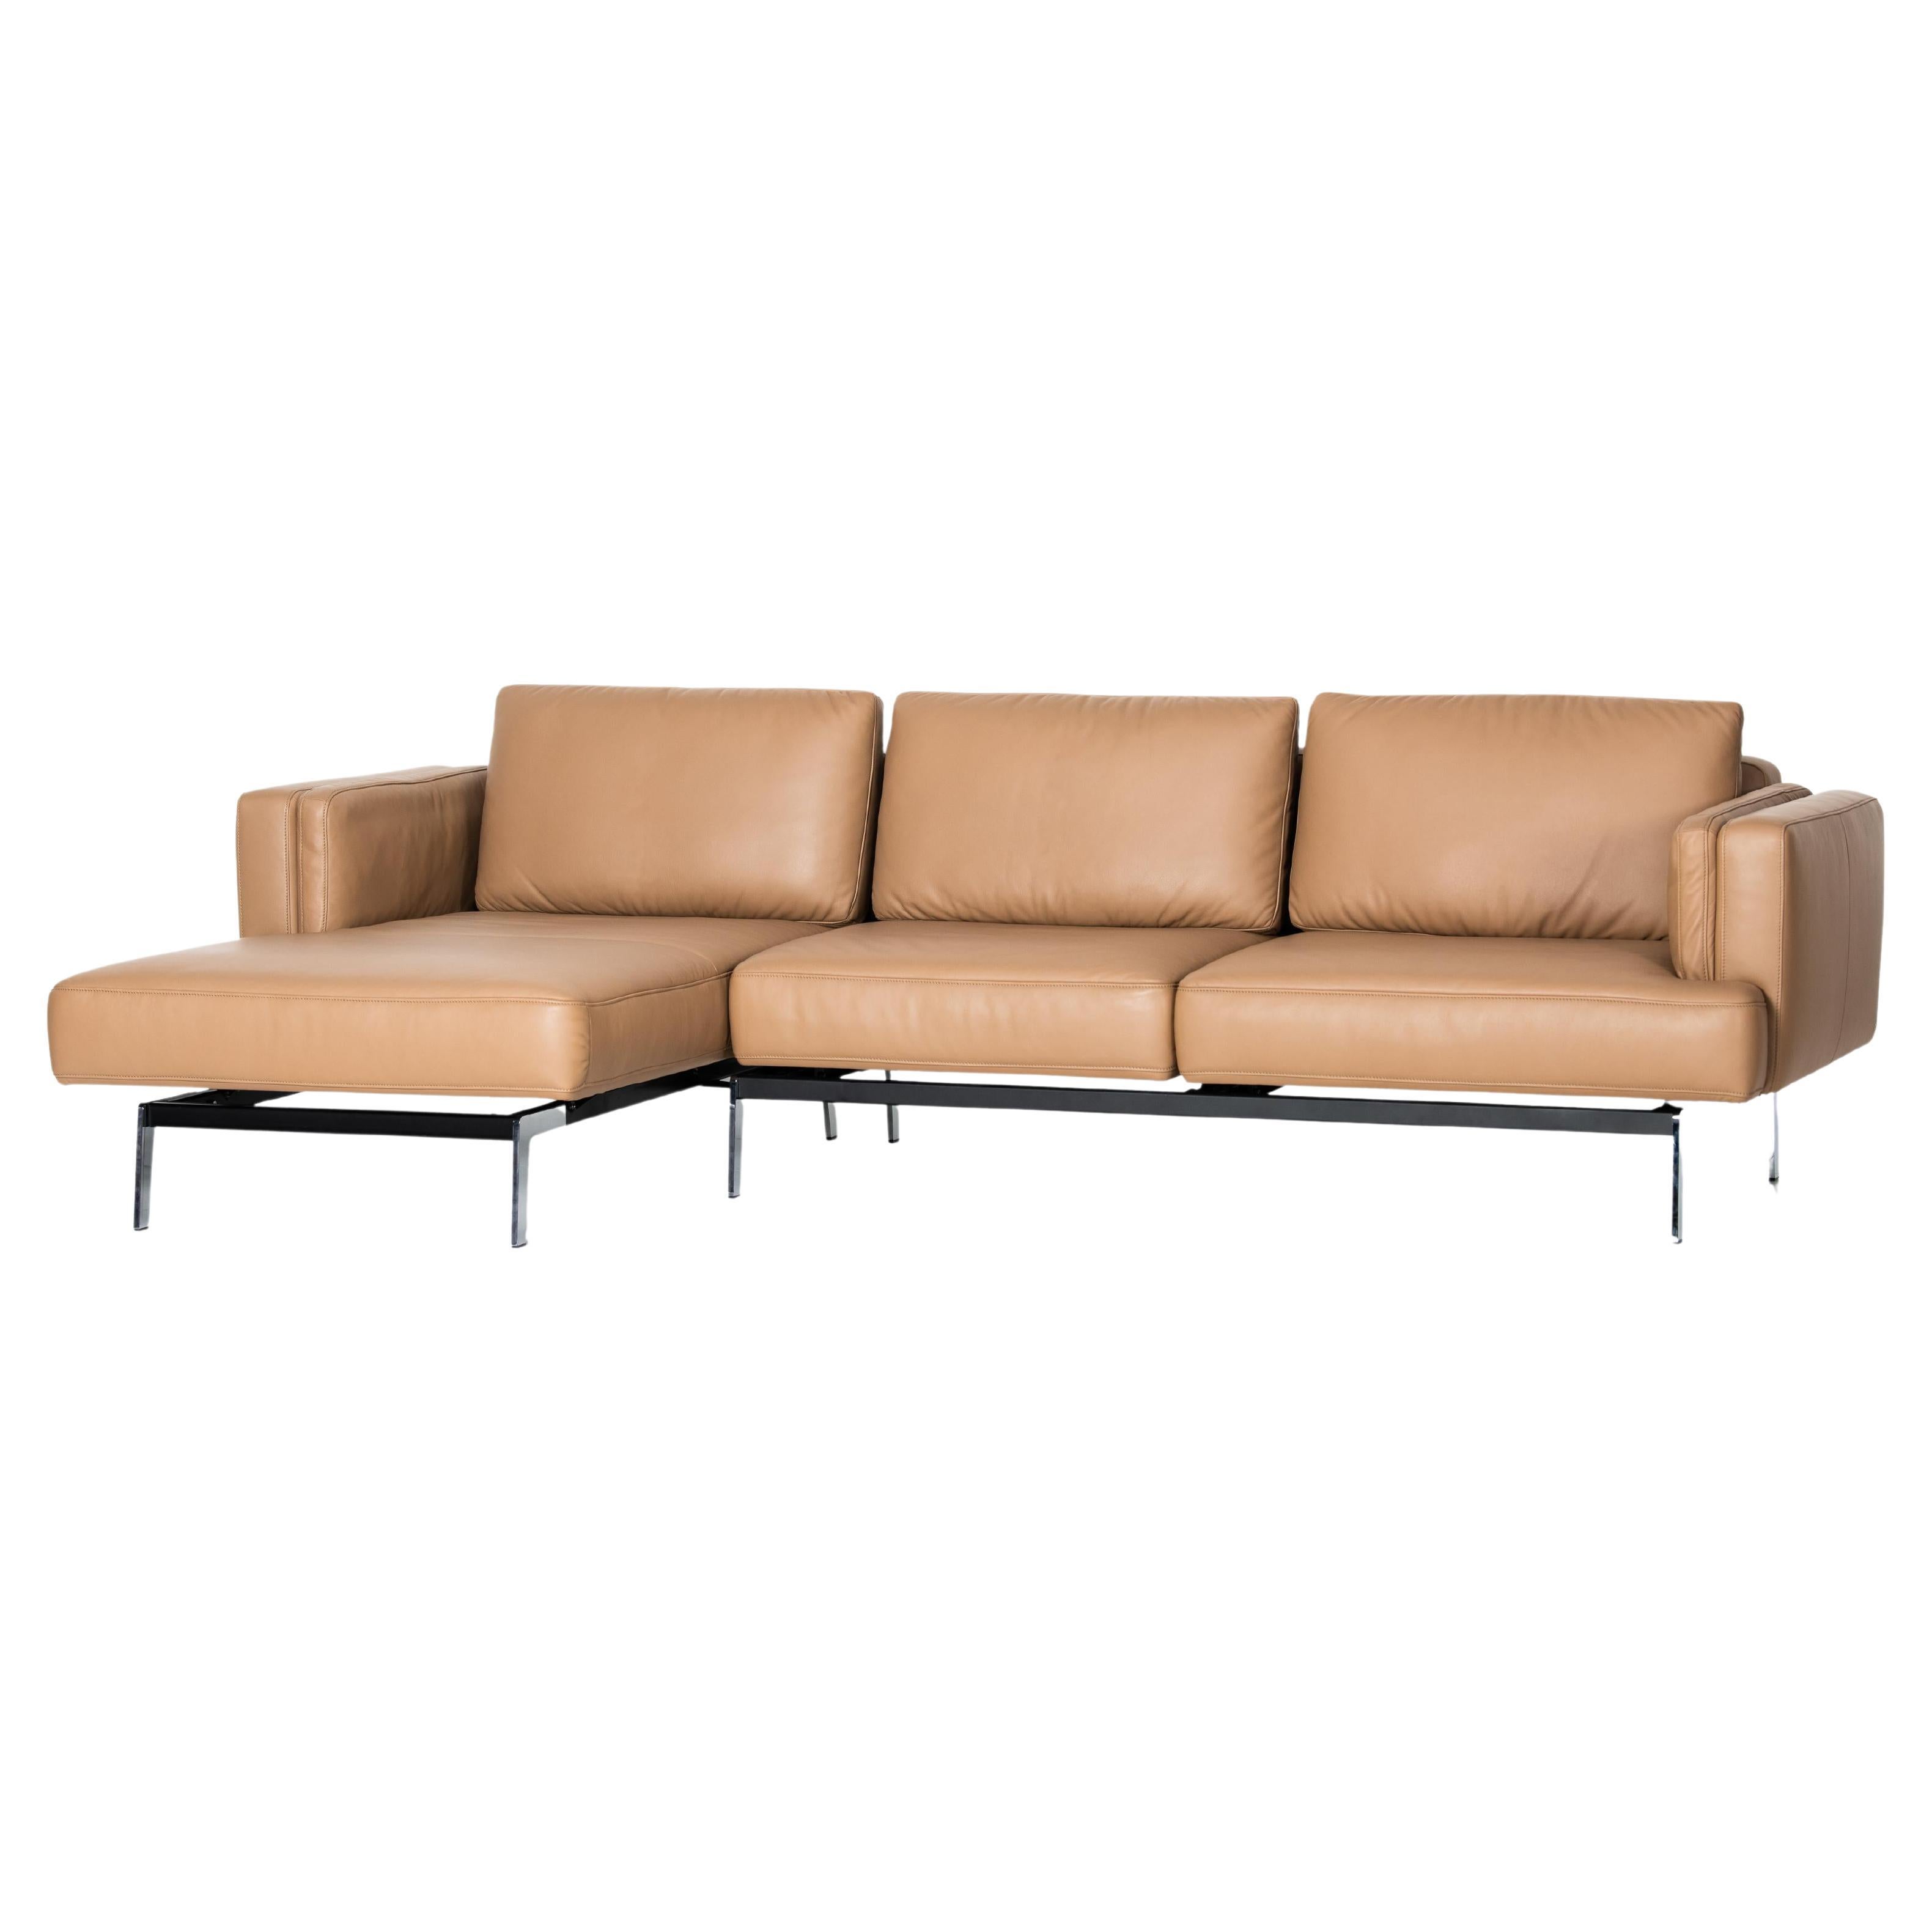 De Sede DS-747/30 Multifunctional Sofa in Noce Leather Seat and Back Upholstery For Sale